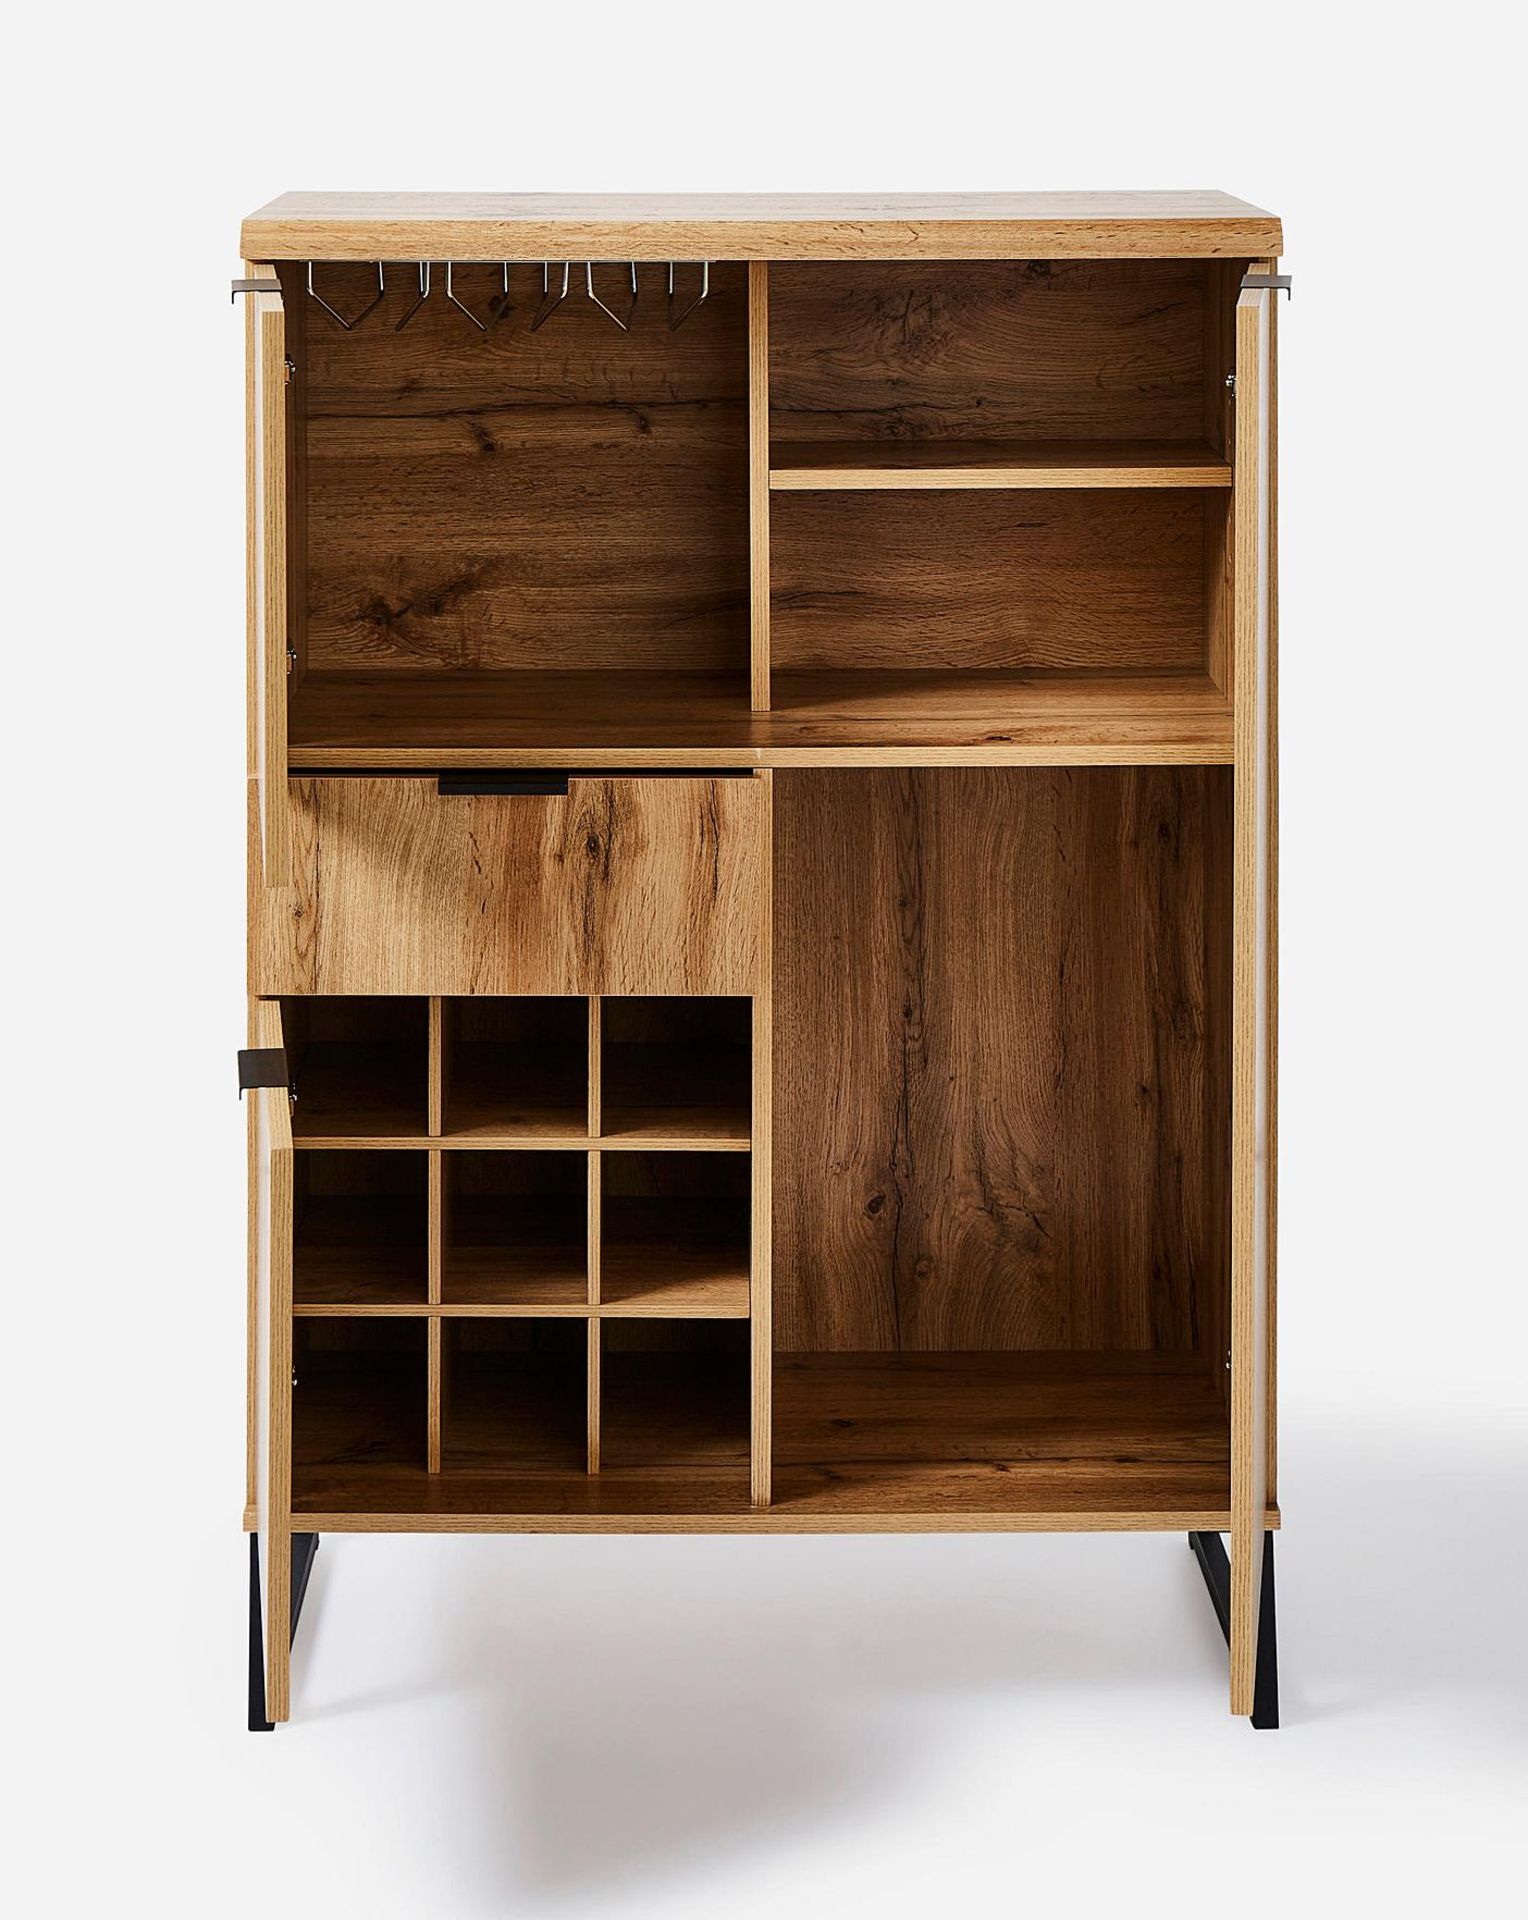 BRAND NEW SHOREDITCH Drinks Cabinet. OAK. RRP £299. The Shoreditch Range is a contemporary and - Image 2 of 4